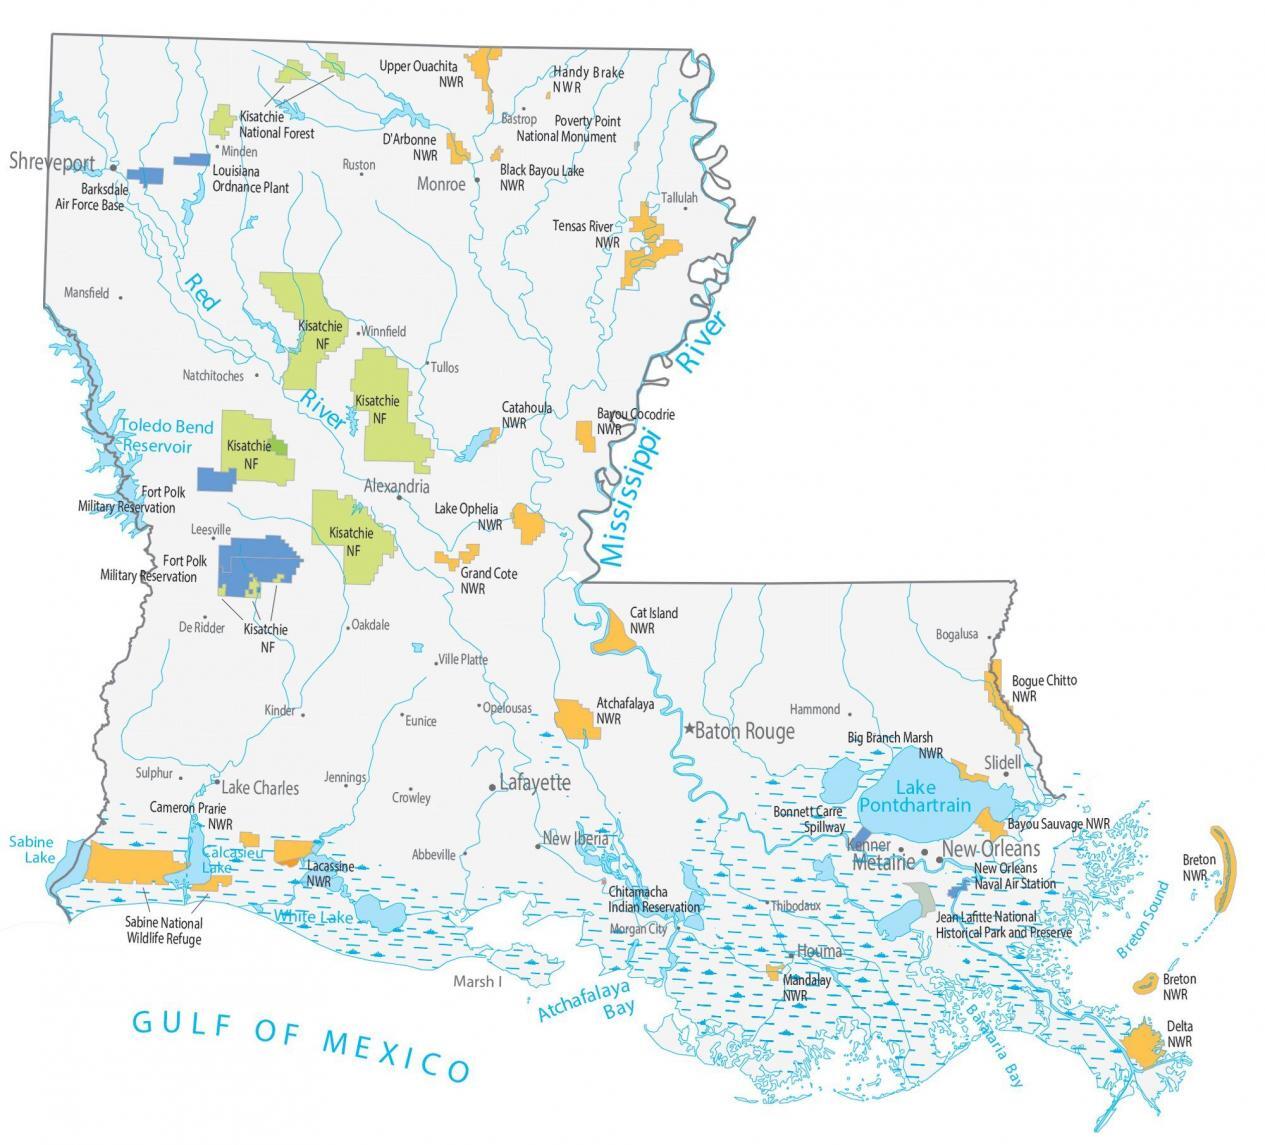 Louisiana State Map - Places and Landmarks - GIS Geography